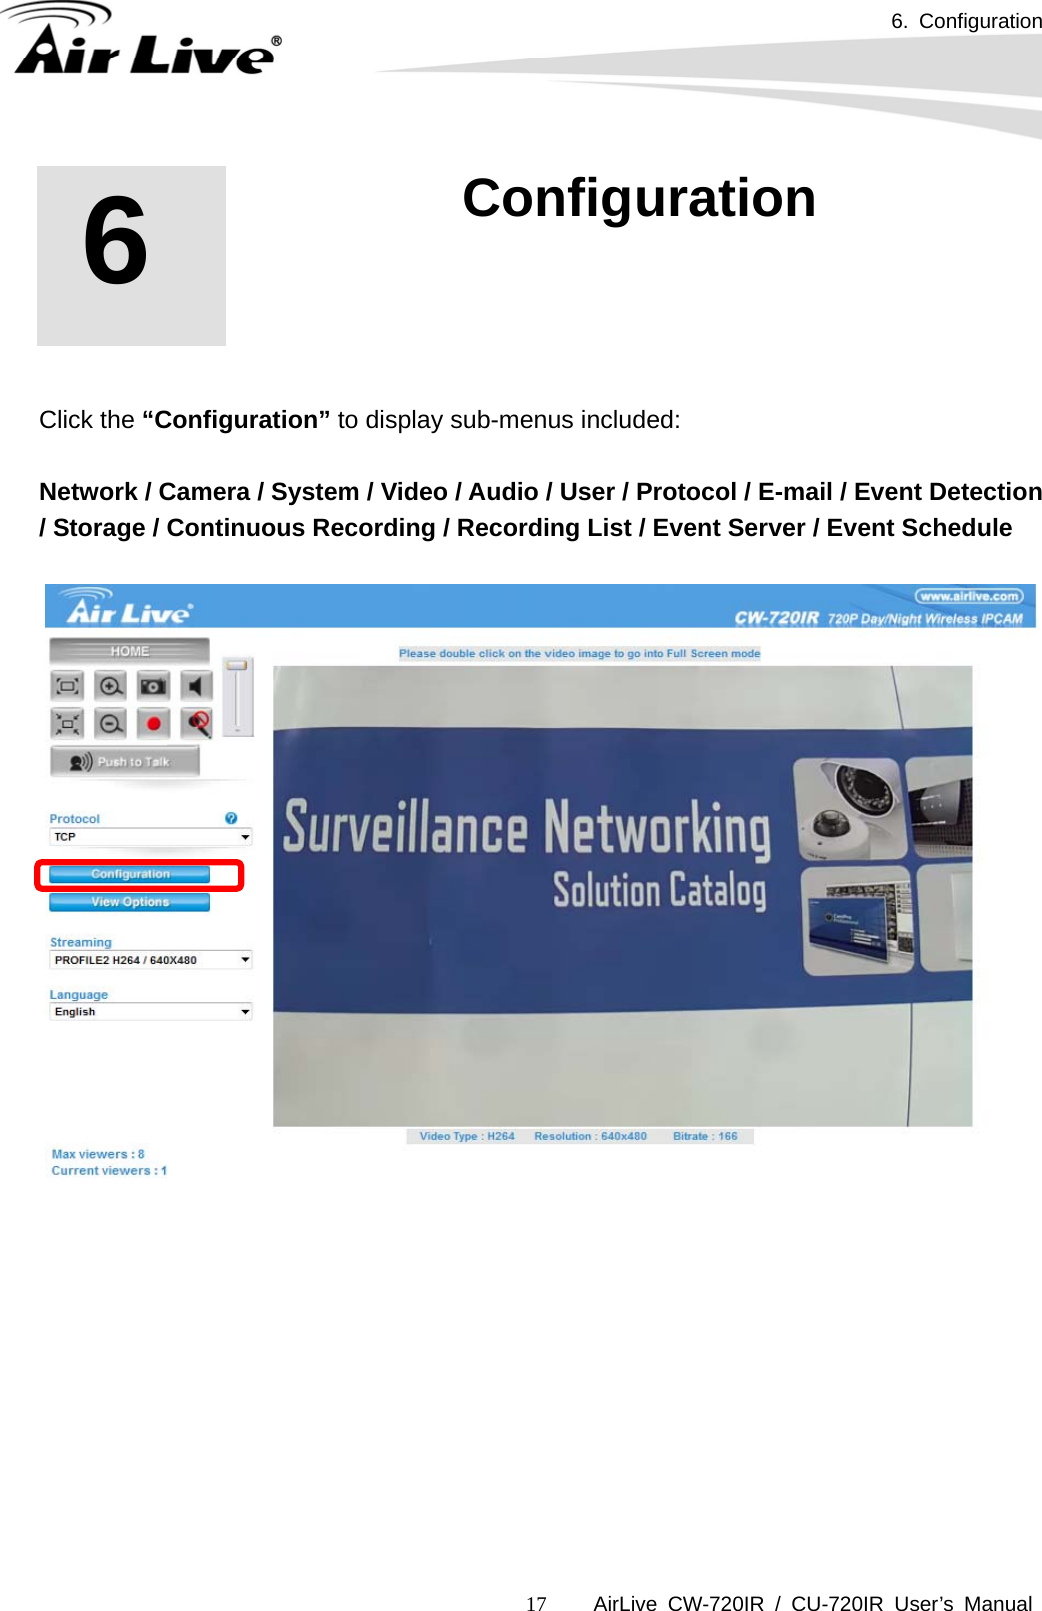 6. Configuration      AirLive CW-720IR / CU-720IR User’s Manual 17     Click the “Configuration” to display sub-menus included:  Network / Camera / System / Video / Audio / User / Protocol / E-mail / Event Detection / Storage / Continuous Recording / Recording List / Event Server / Event Schedule           6   6. Configuration 